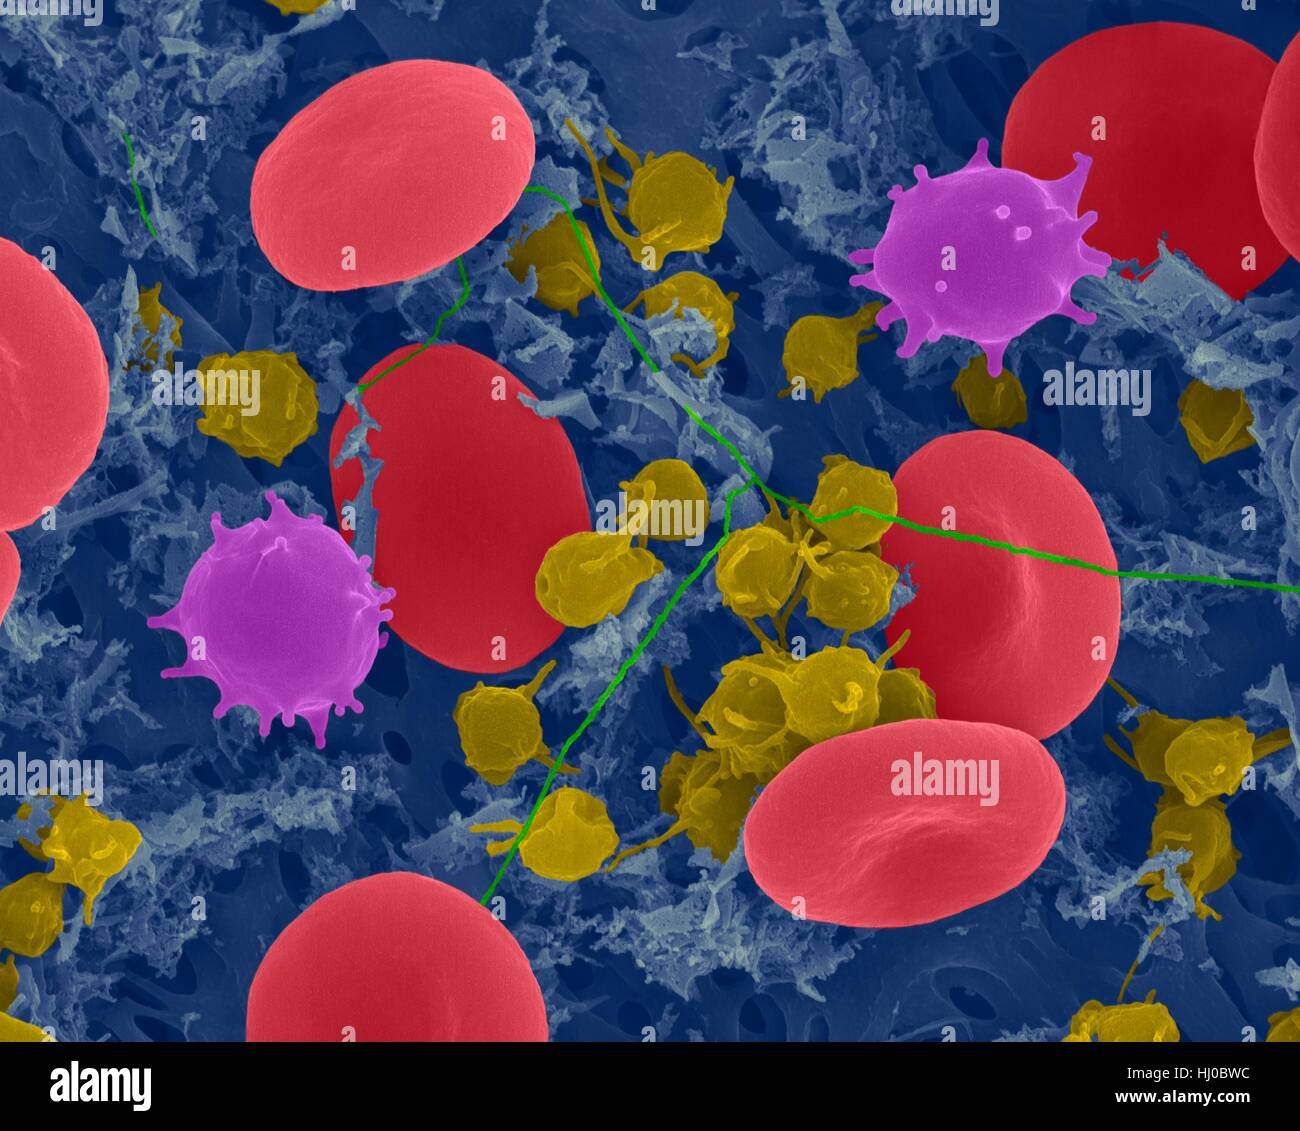 Human red blood cells,monocytes (white blood cells),activated platelets ...